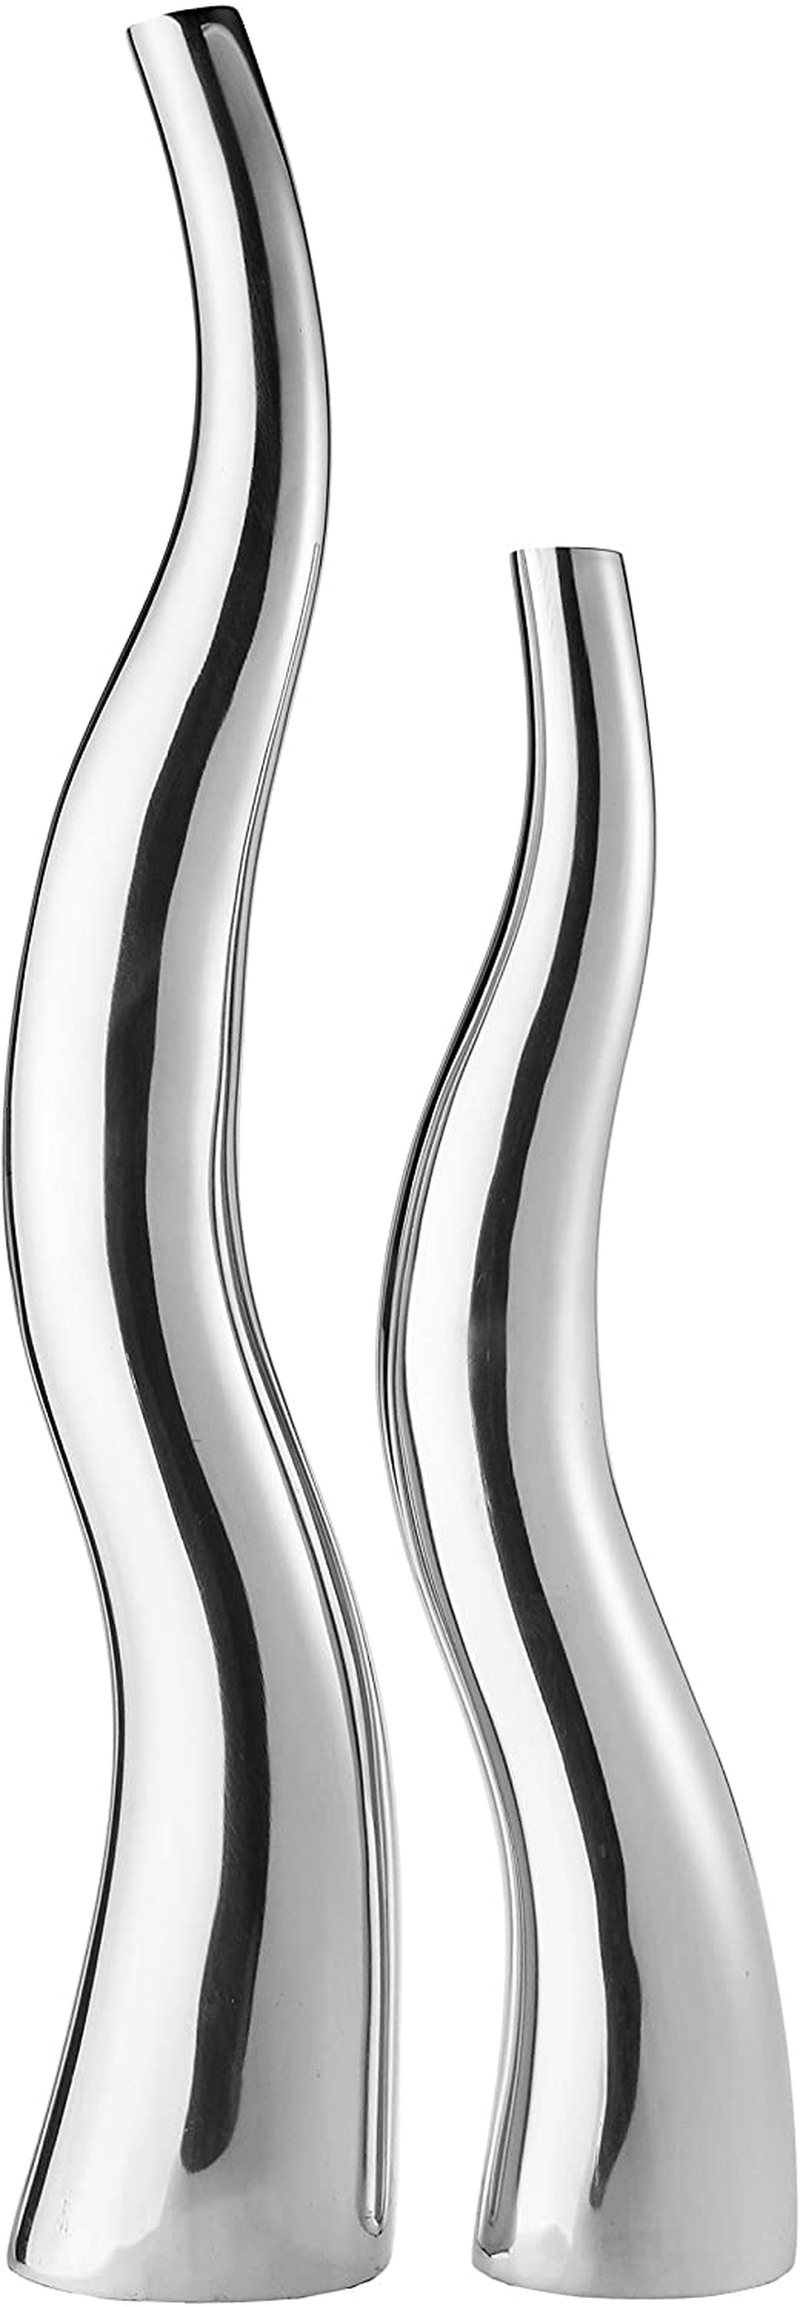 Modern Day Accents Curva Tall Set of 2, Silver, Aluminum, Contemporary, Modern, Wiggly, Popular, Glam, Floor Standing, Lg 6 32, Sm Vase: 5” x 3.5” x 24 Home & Garden > Decor > Vases Modern Day Accents   